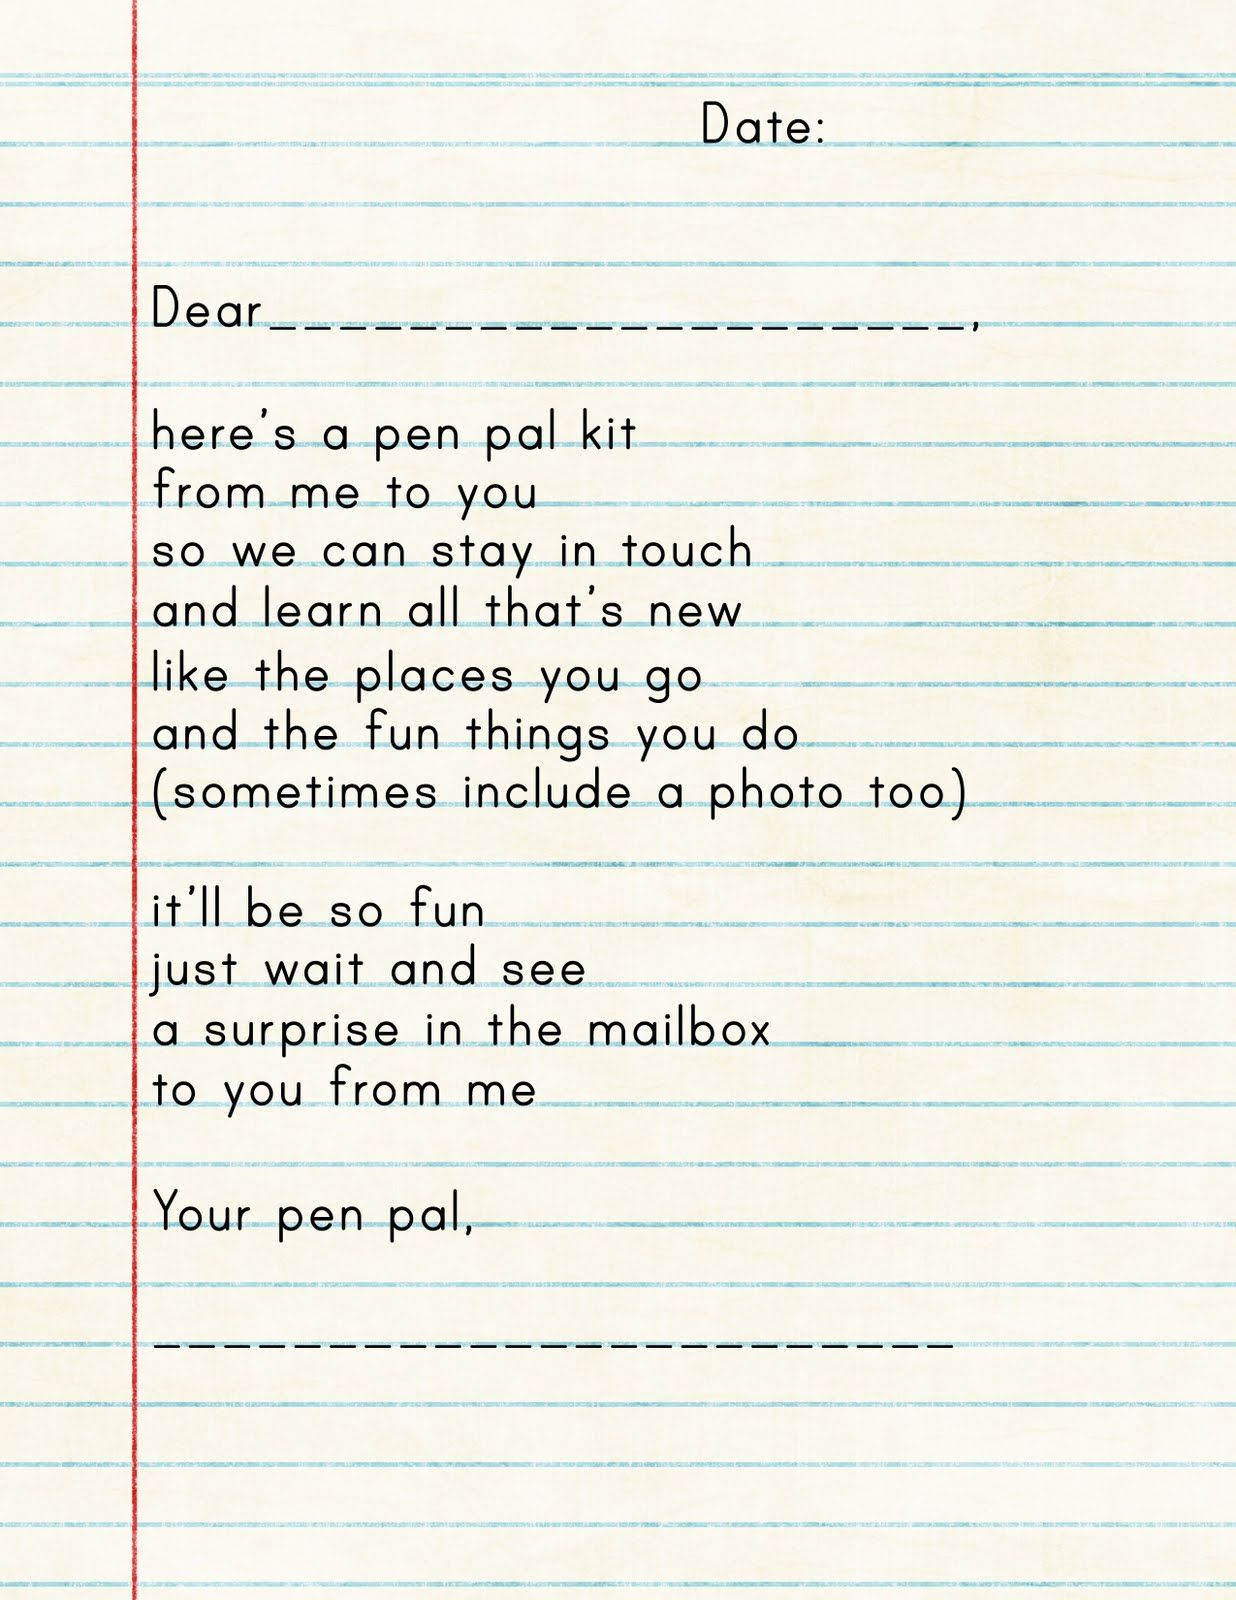 Pen Pal Kit Ideas | List of things to send as a package to start pen-palling with a friend. Great idea for kids!